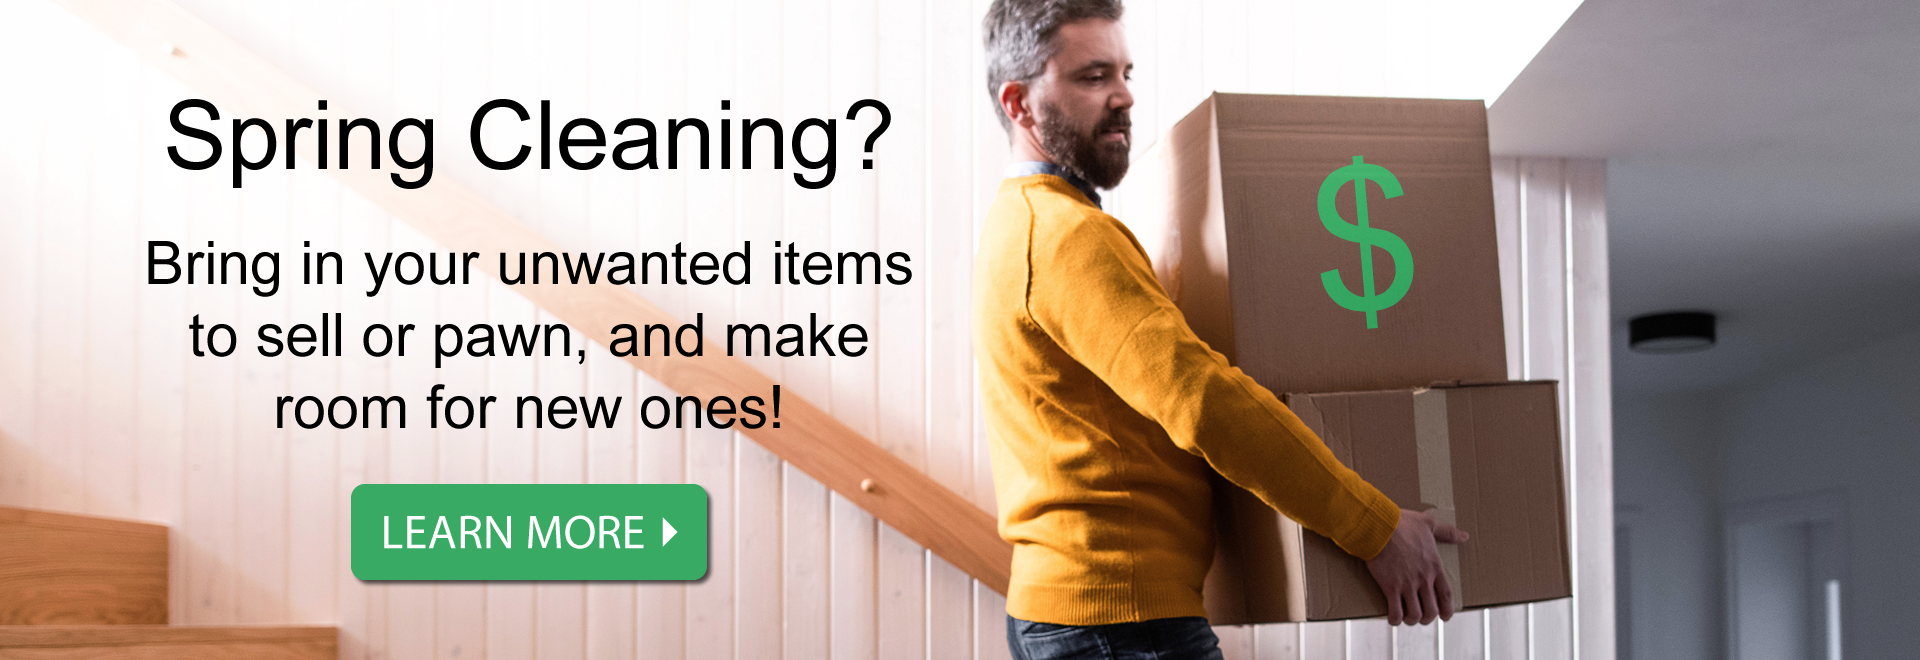 Spring Cleaning? Bring in your unwanted items to sell or pawn, and make room for new ones!